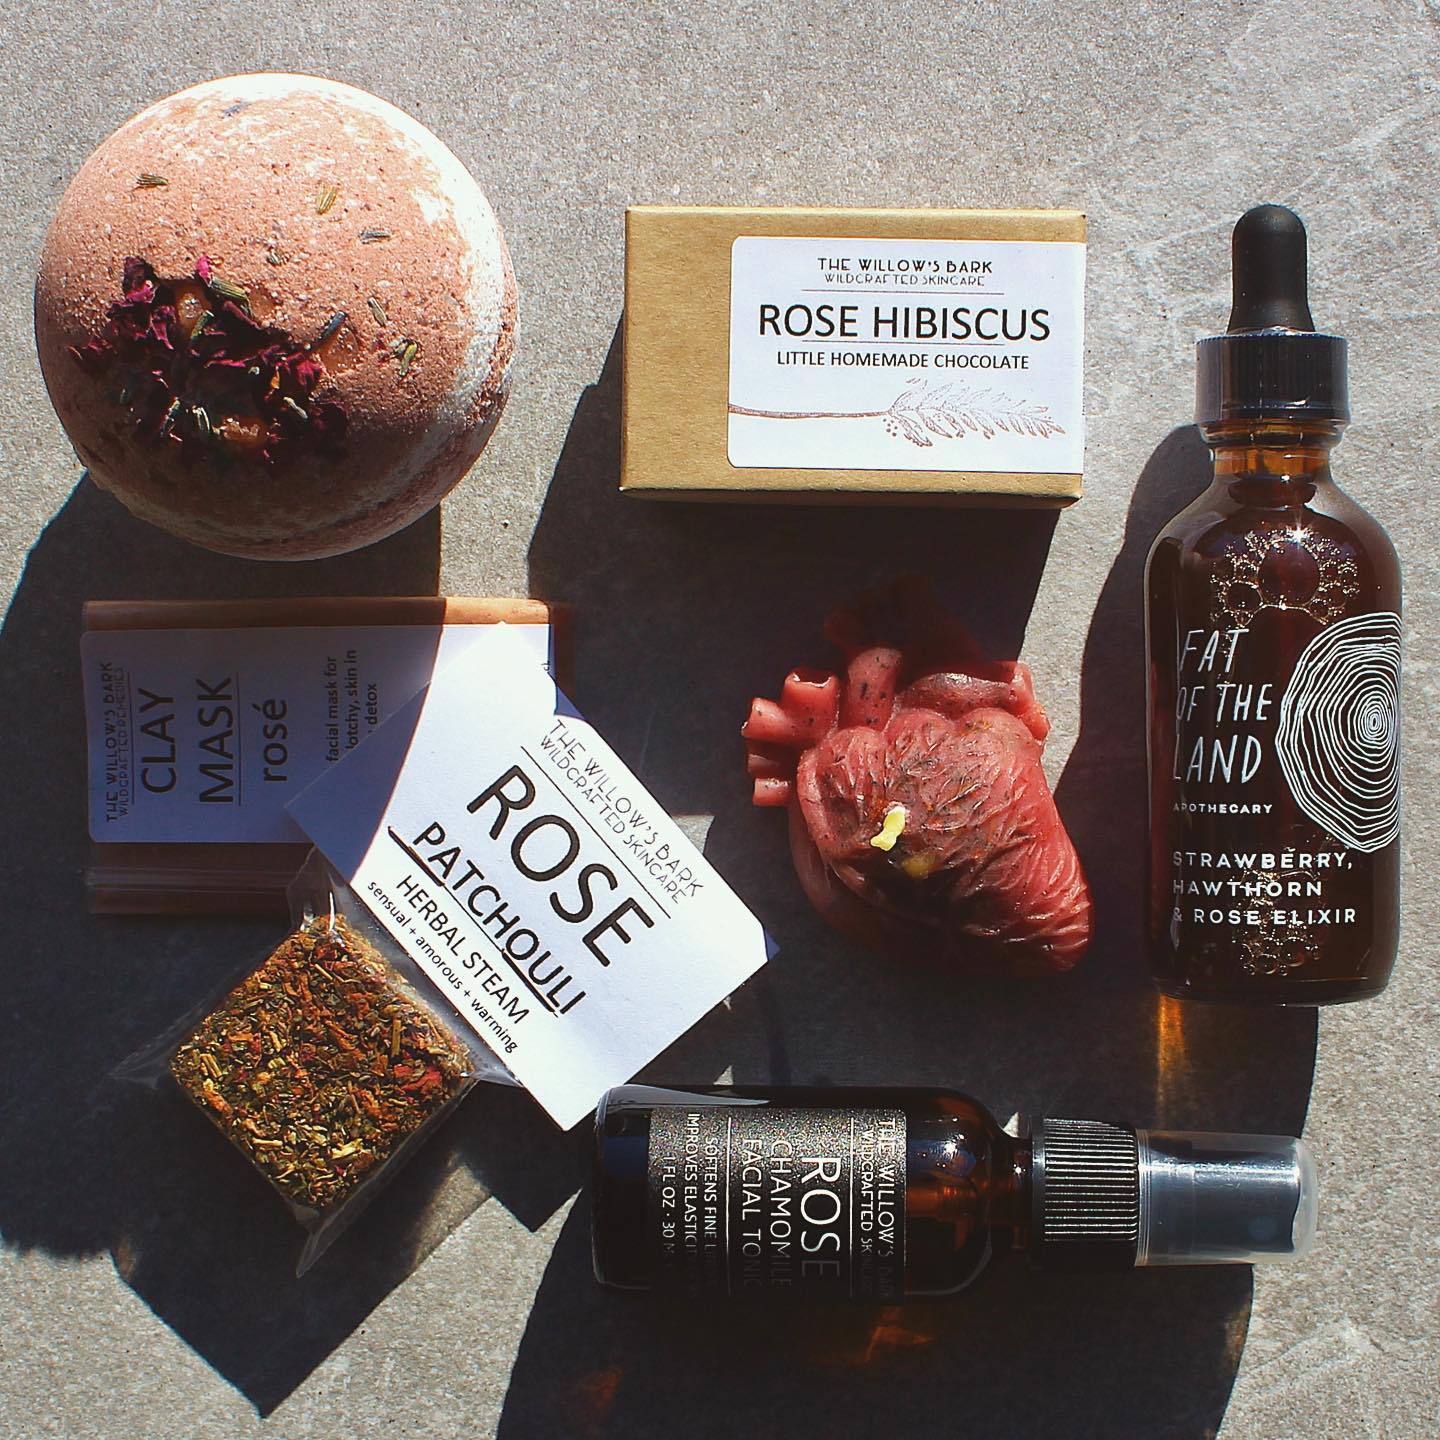 natural skincare products arranged on a stone